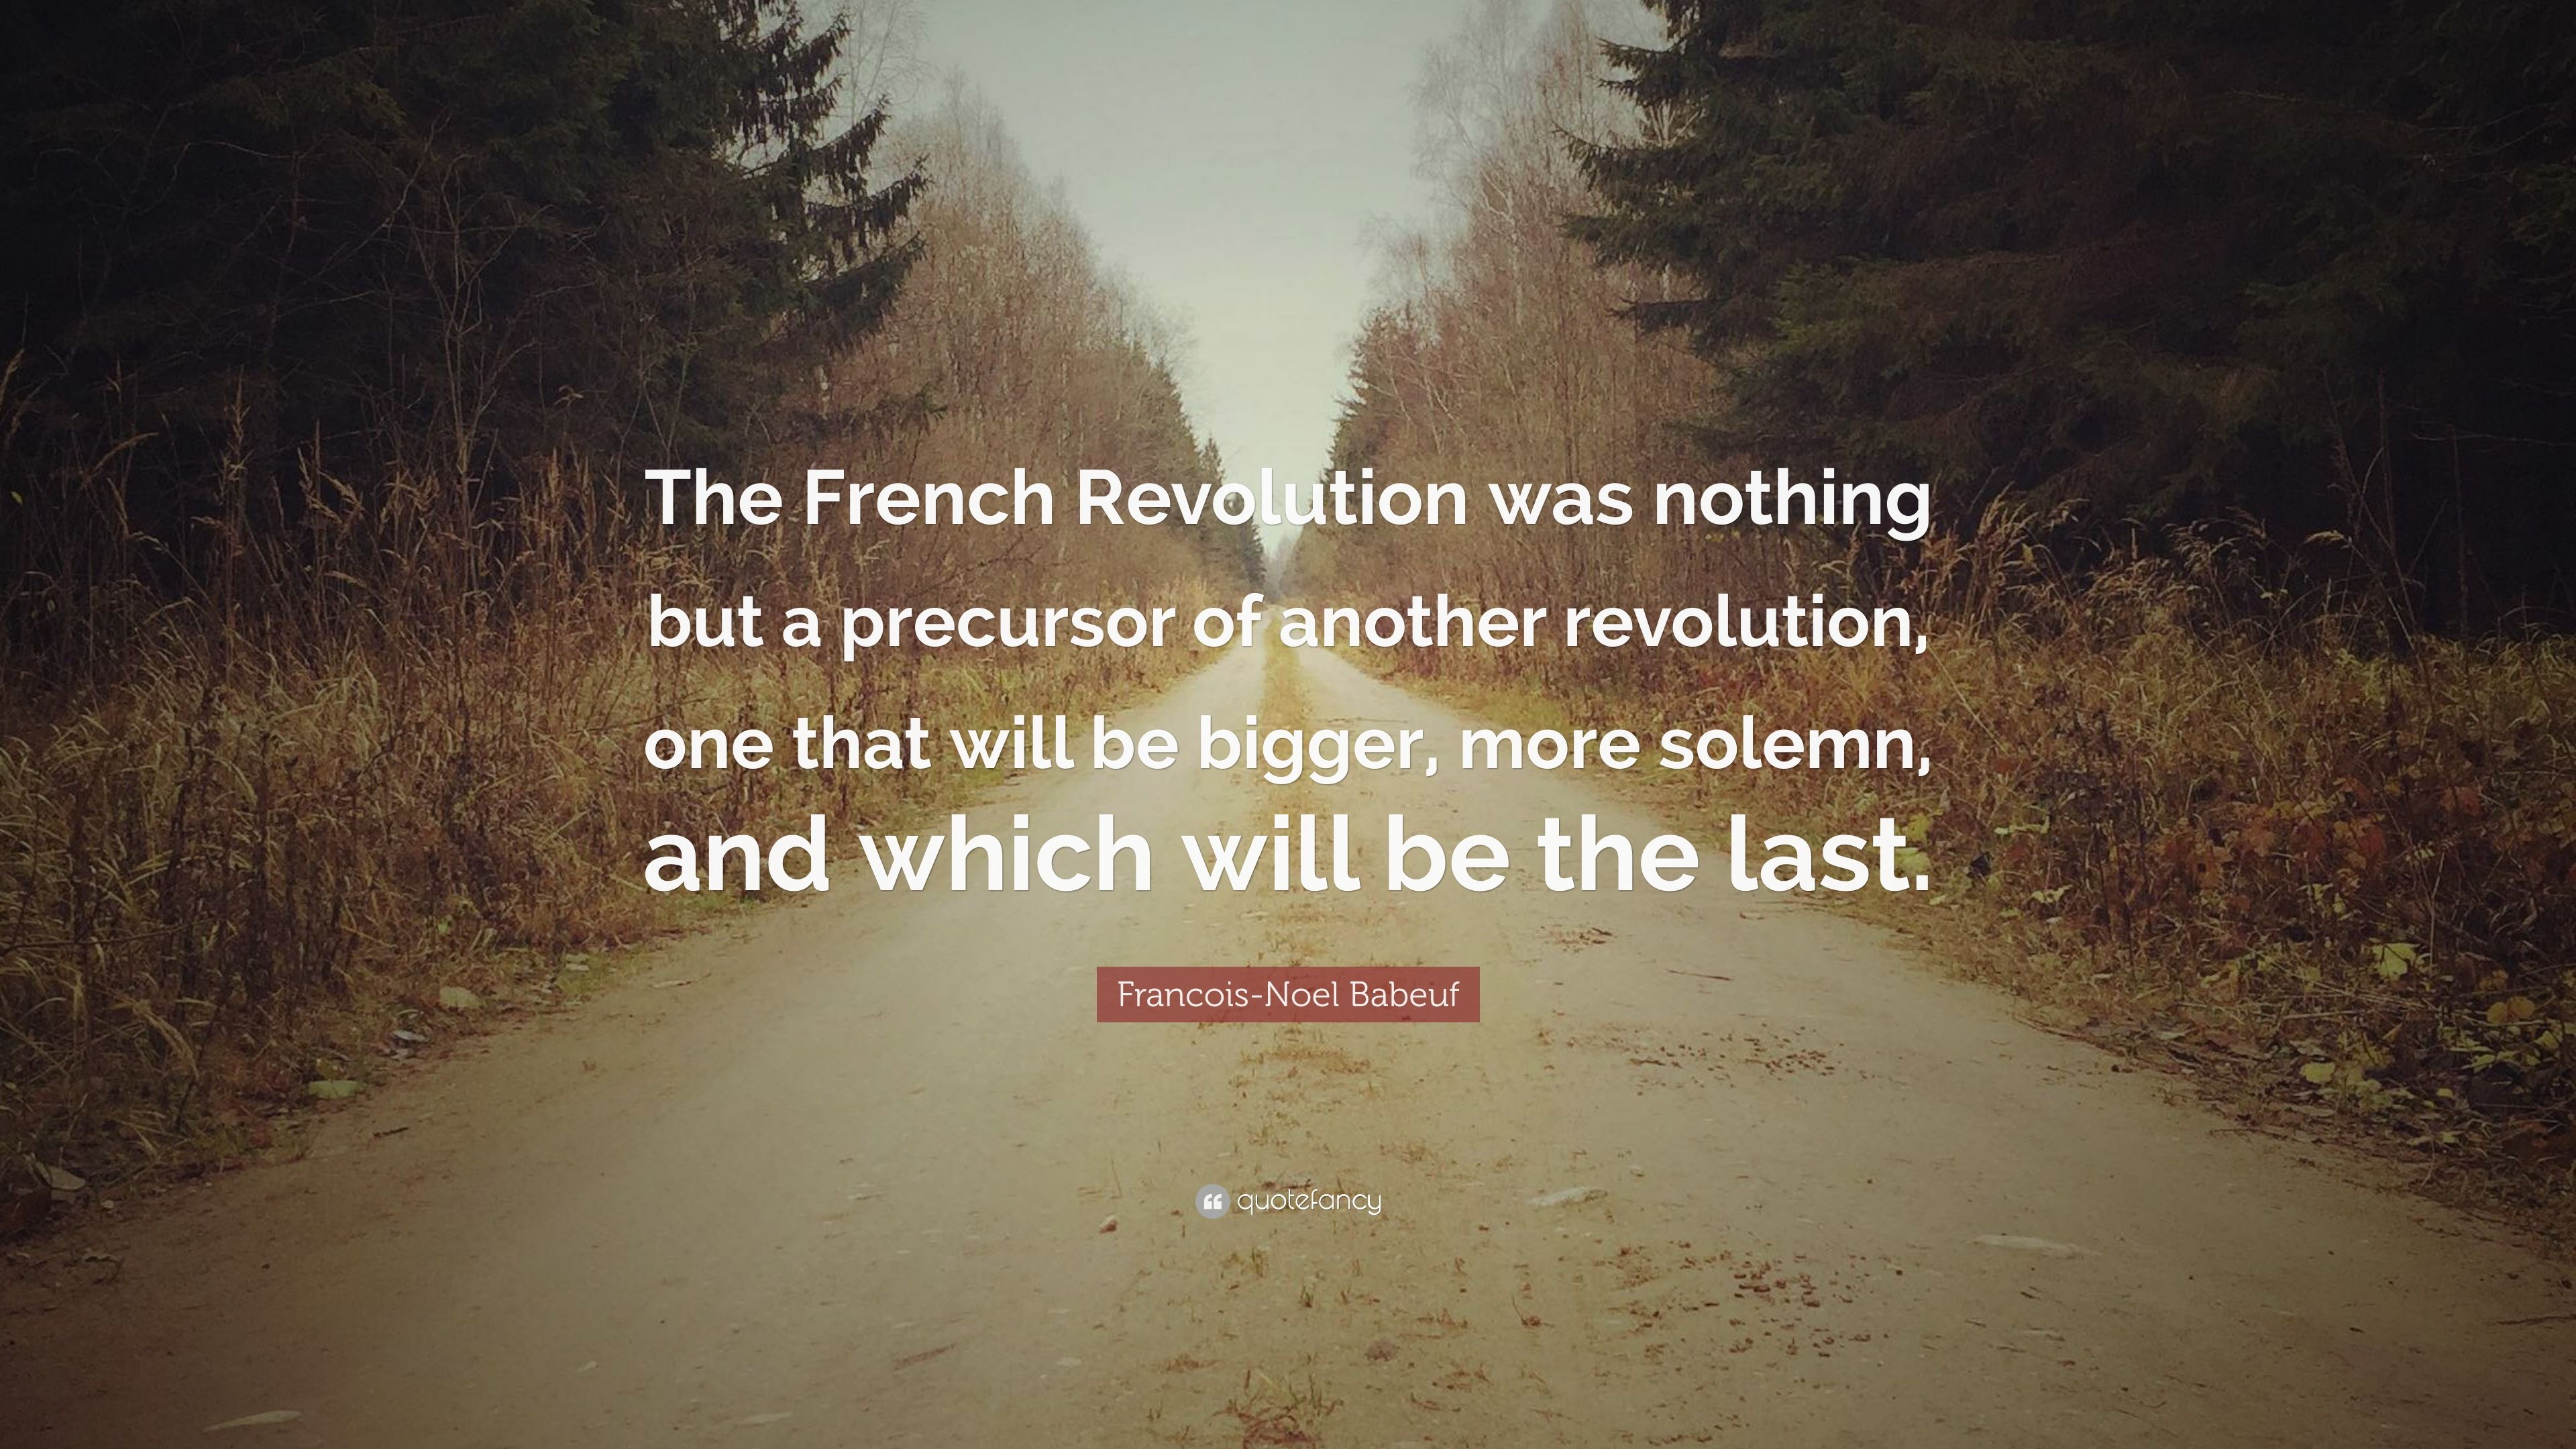 Francois Noel Babeuf Quote: “The French Revolution Was Nothing But A Precursor Of Another Revolution, One That Will Be Bigger, More Solemn, And Which.” (7 Wallpaper)